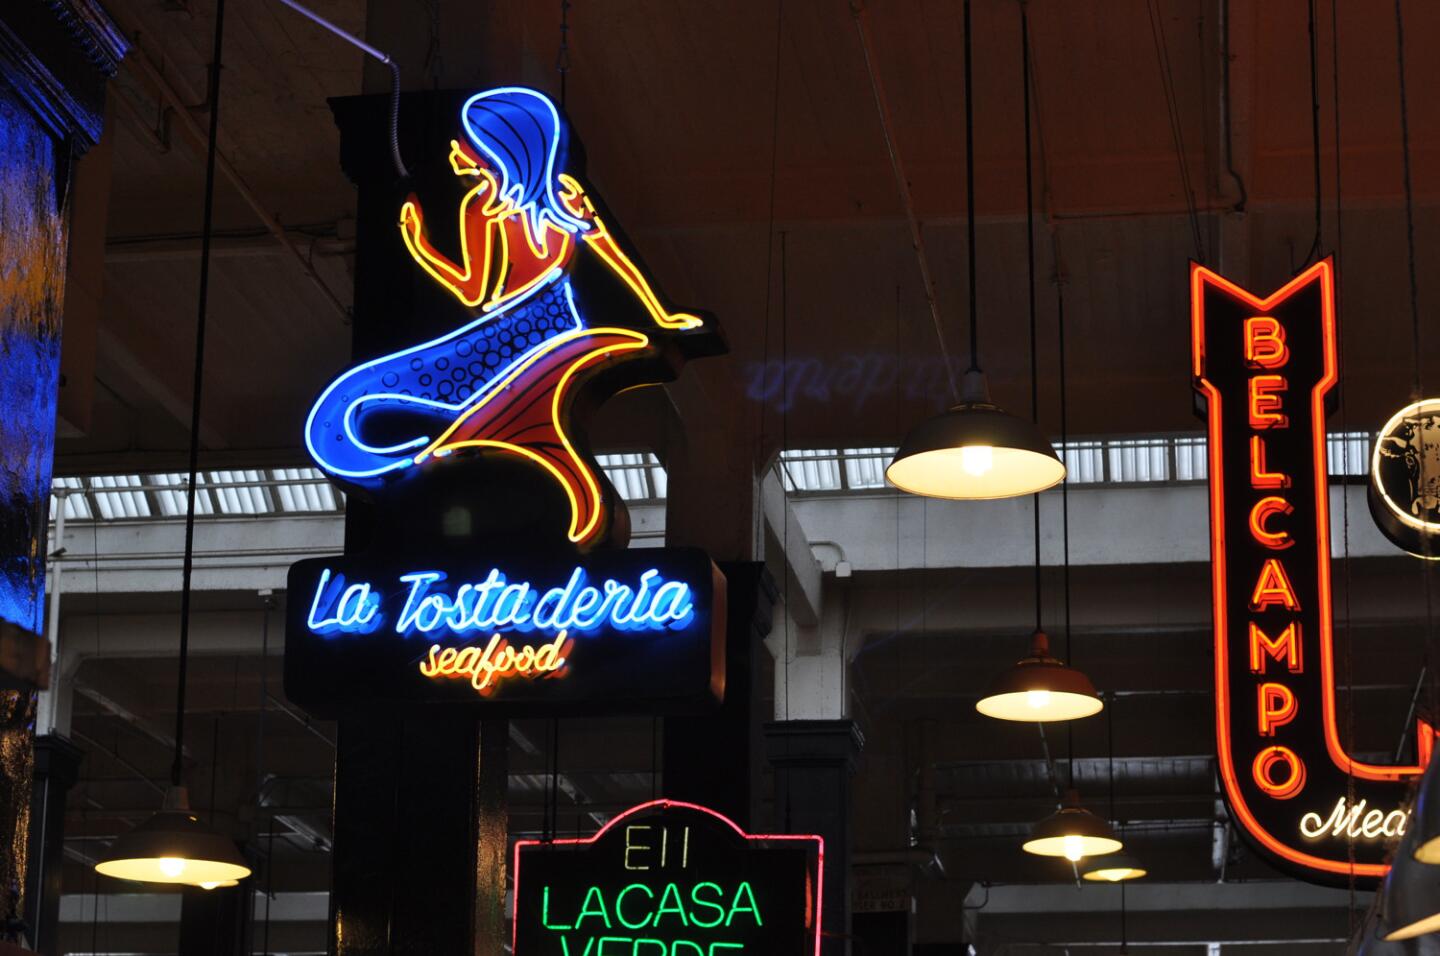 La Tostaderia's neon mermaid is among the signage in downtown Los Angeles' Grand Central Market.